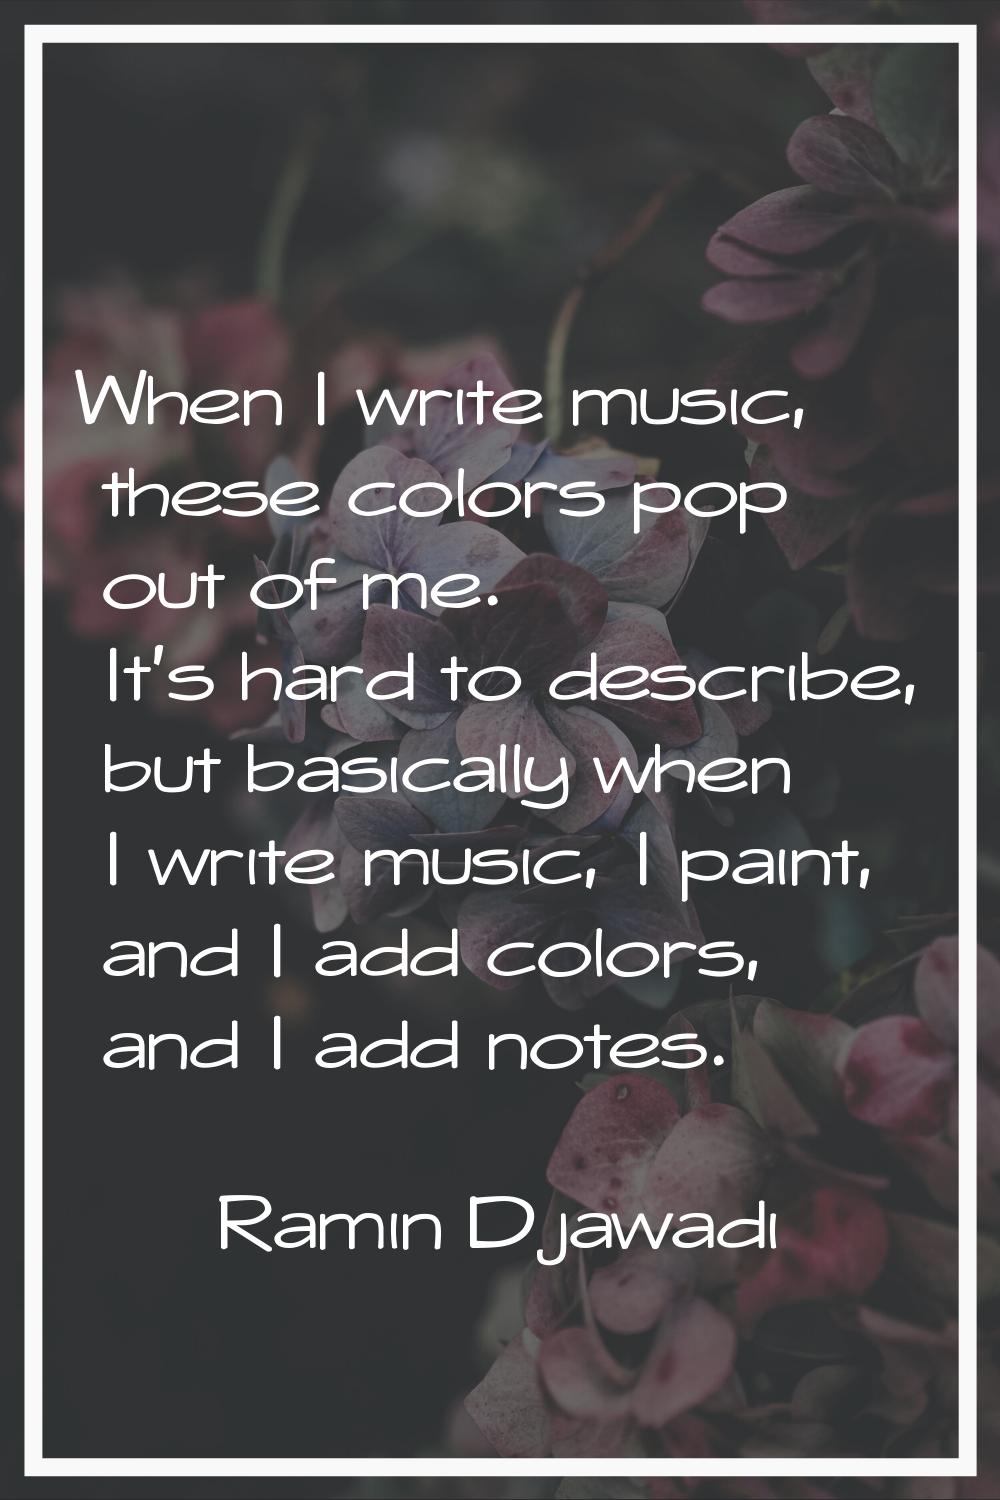 When I write music, these colors pop out of me. It's hard to describe, but basically when I write m